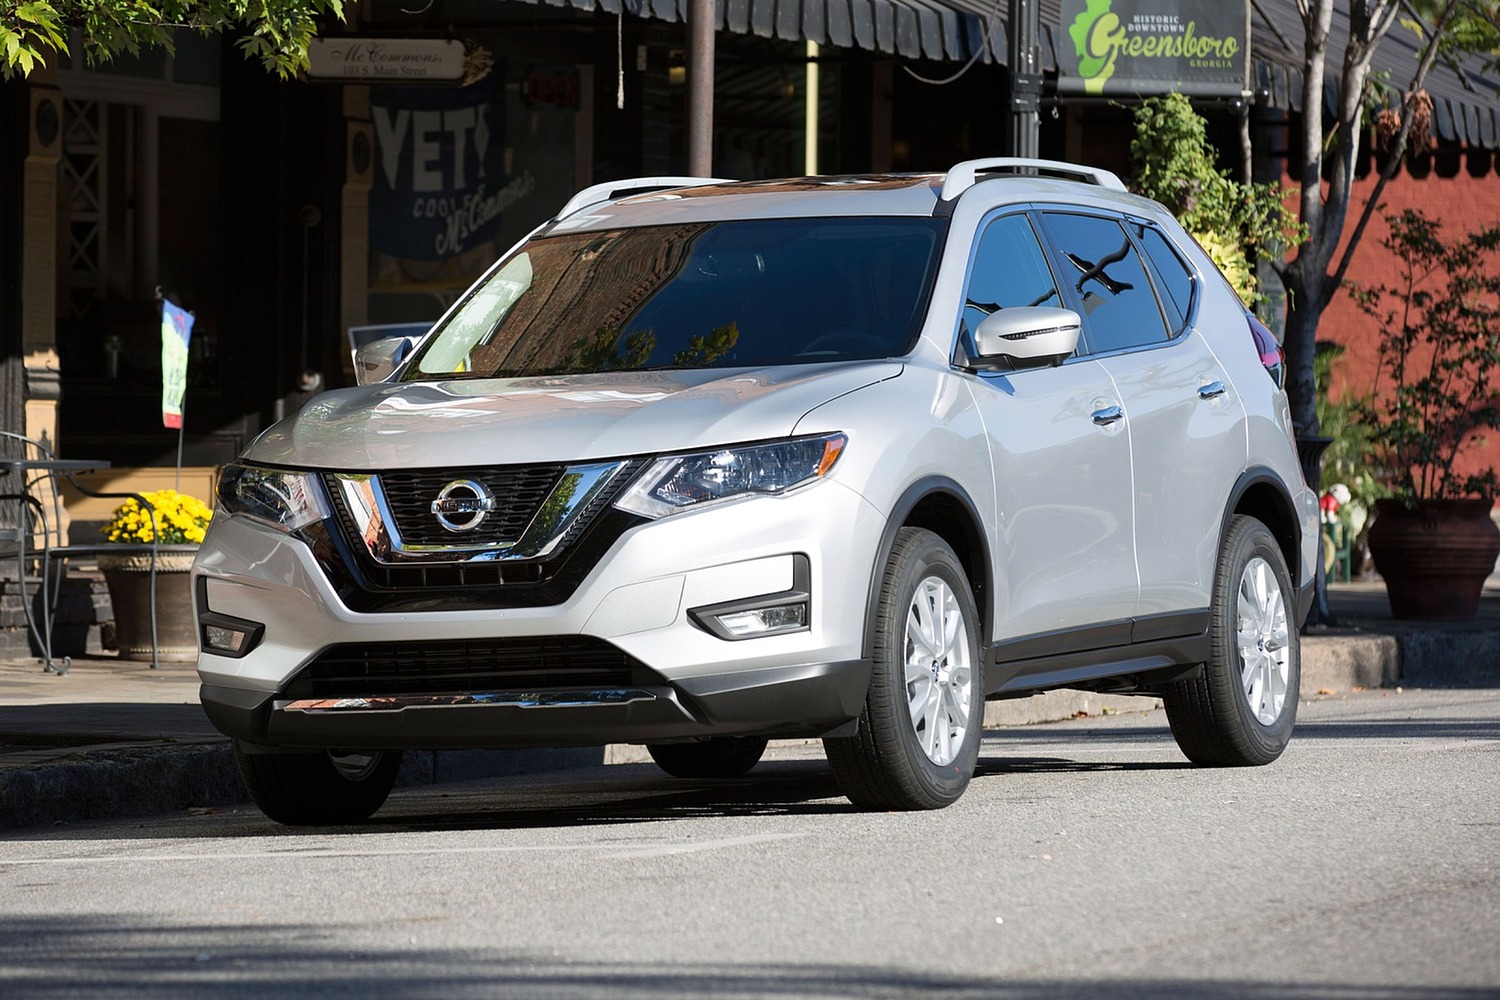 Nissan Rogue SV 4dr SUV Exterior. Premium Package Shown. (2017 model year shown)